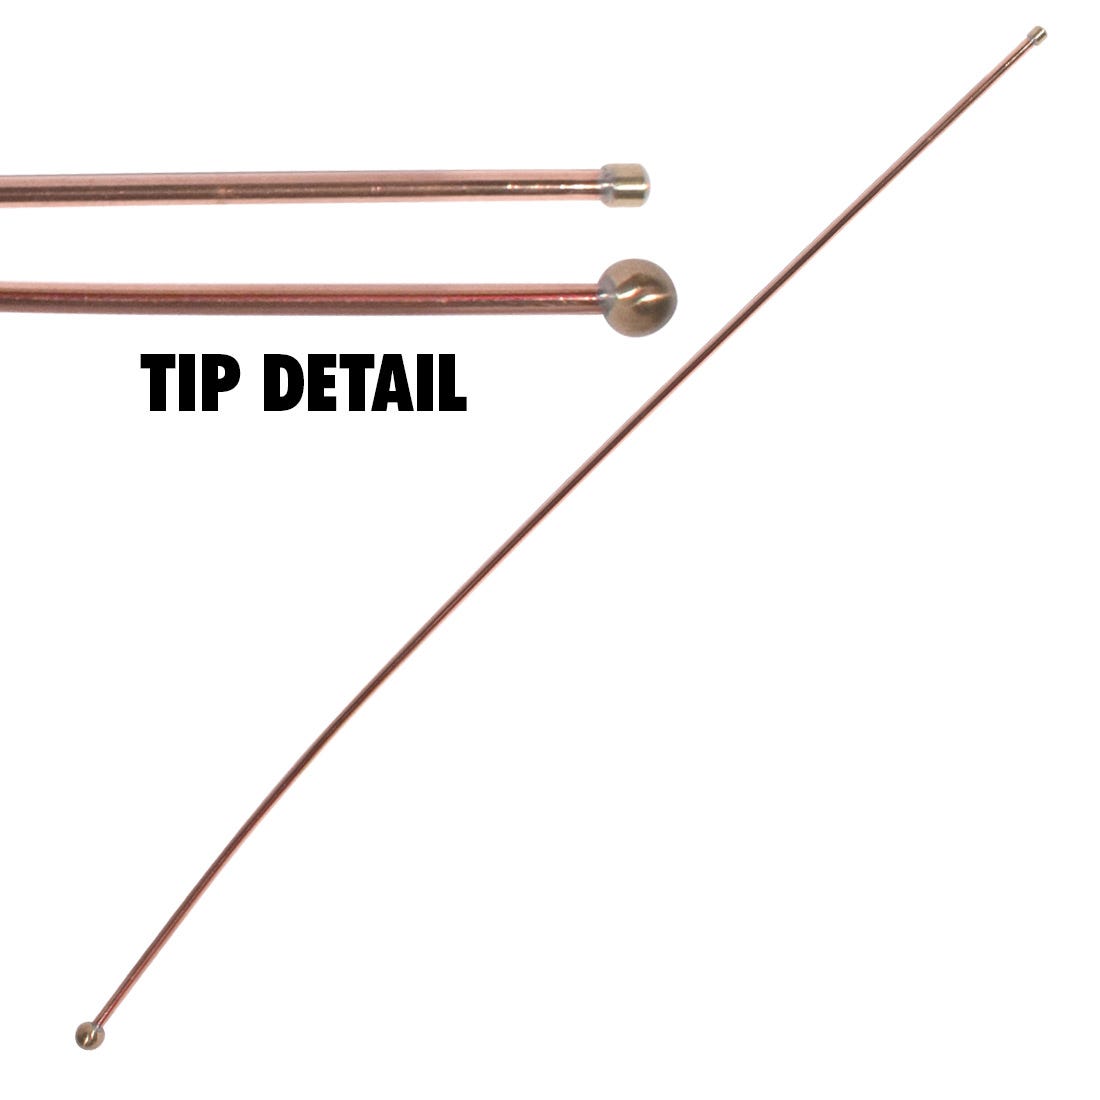 Stylet - Copper & Suction Tube, 14"/36cm